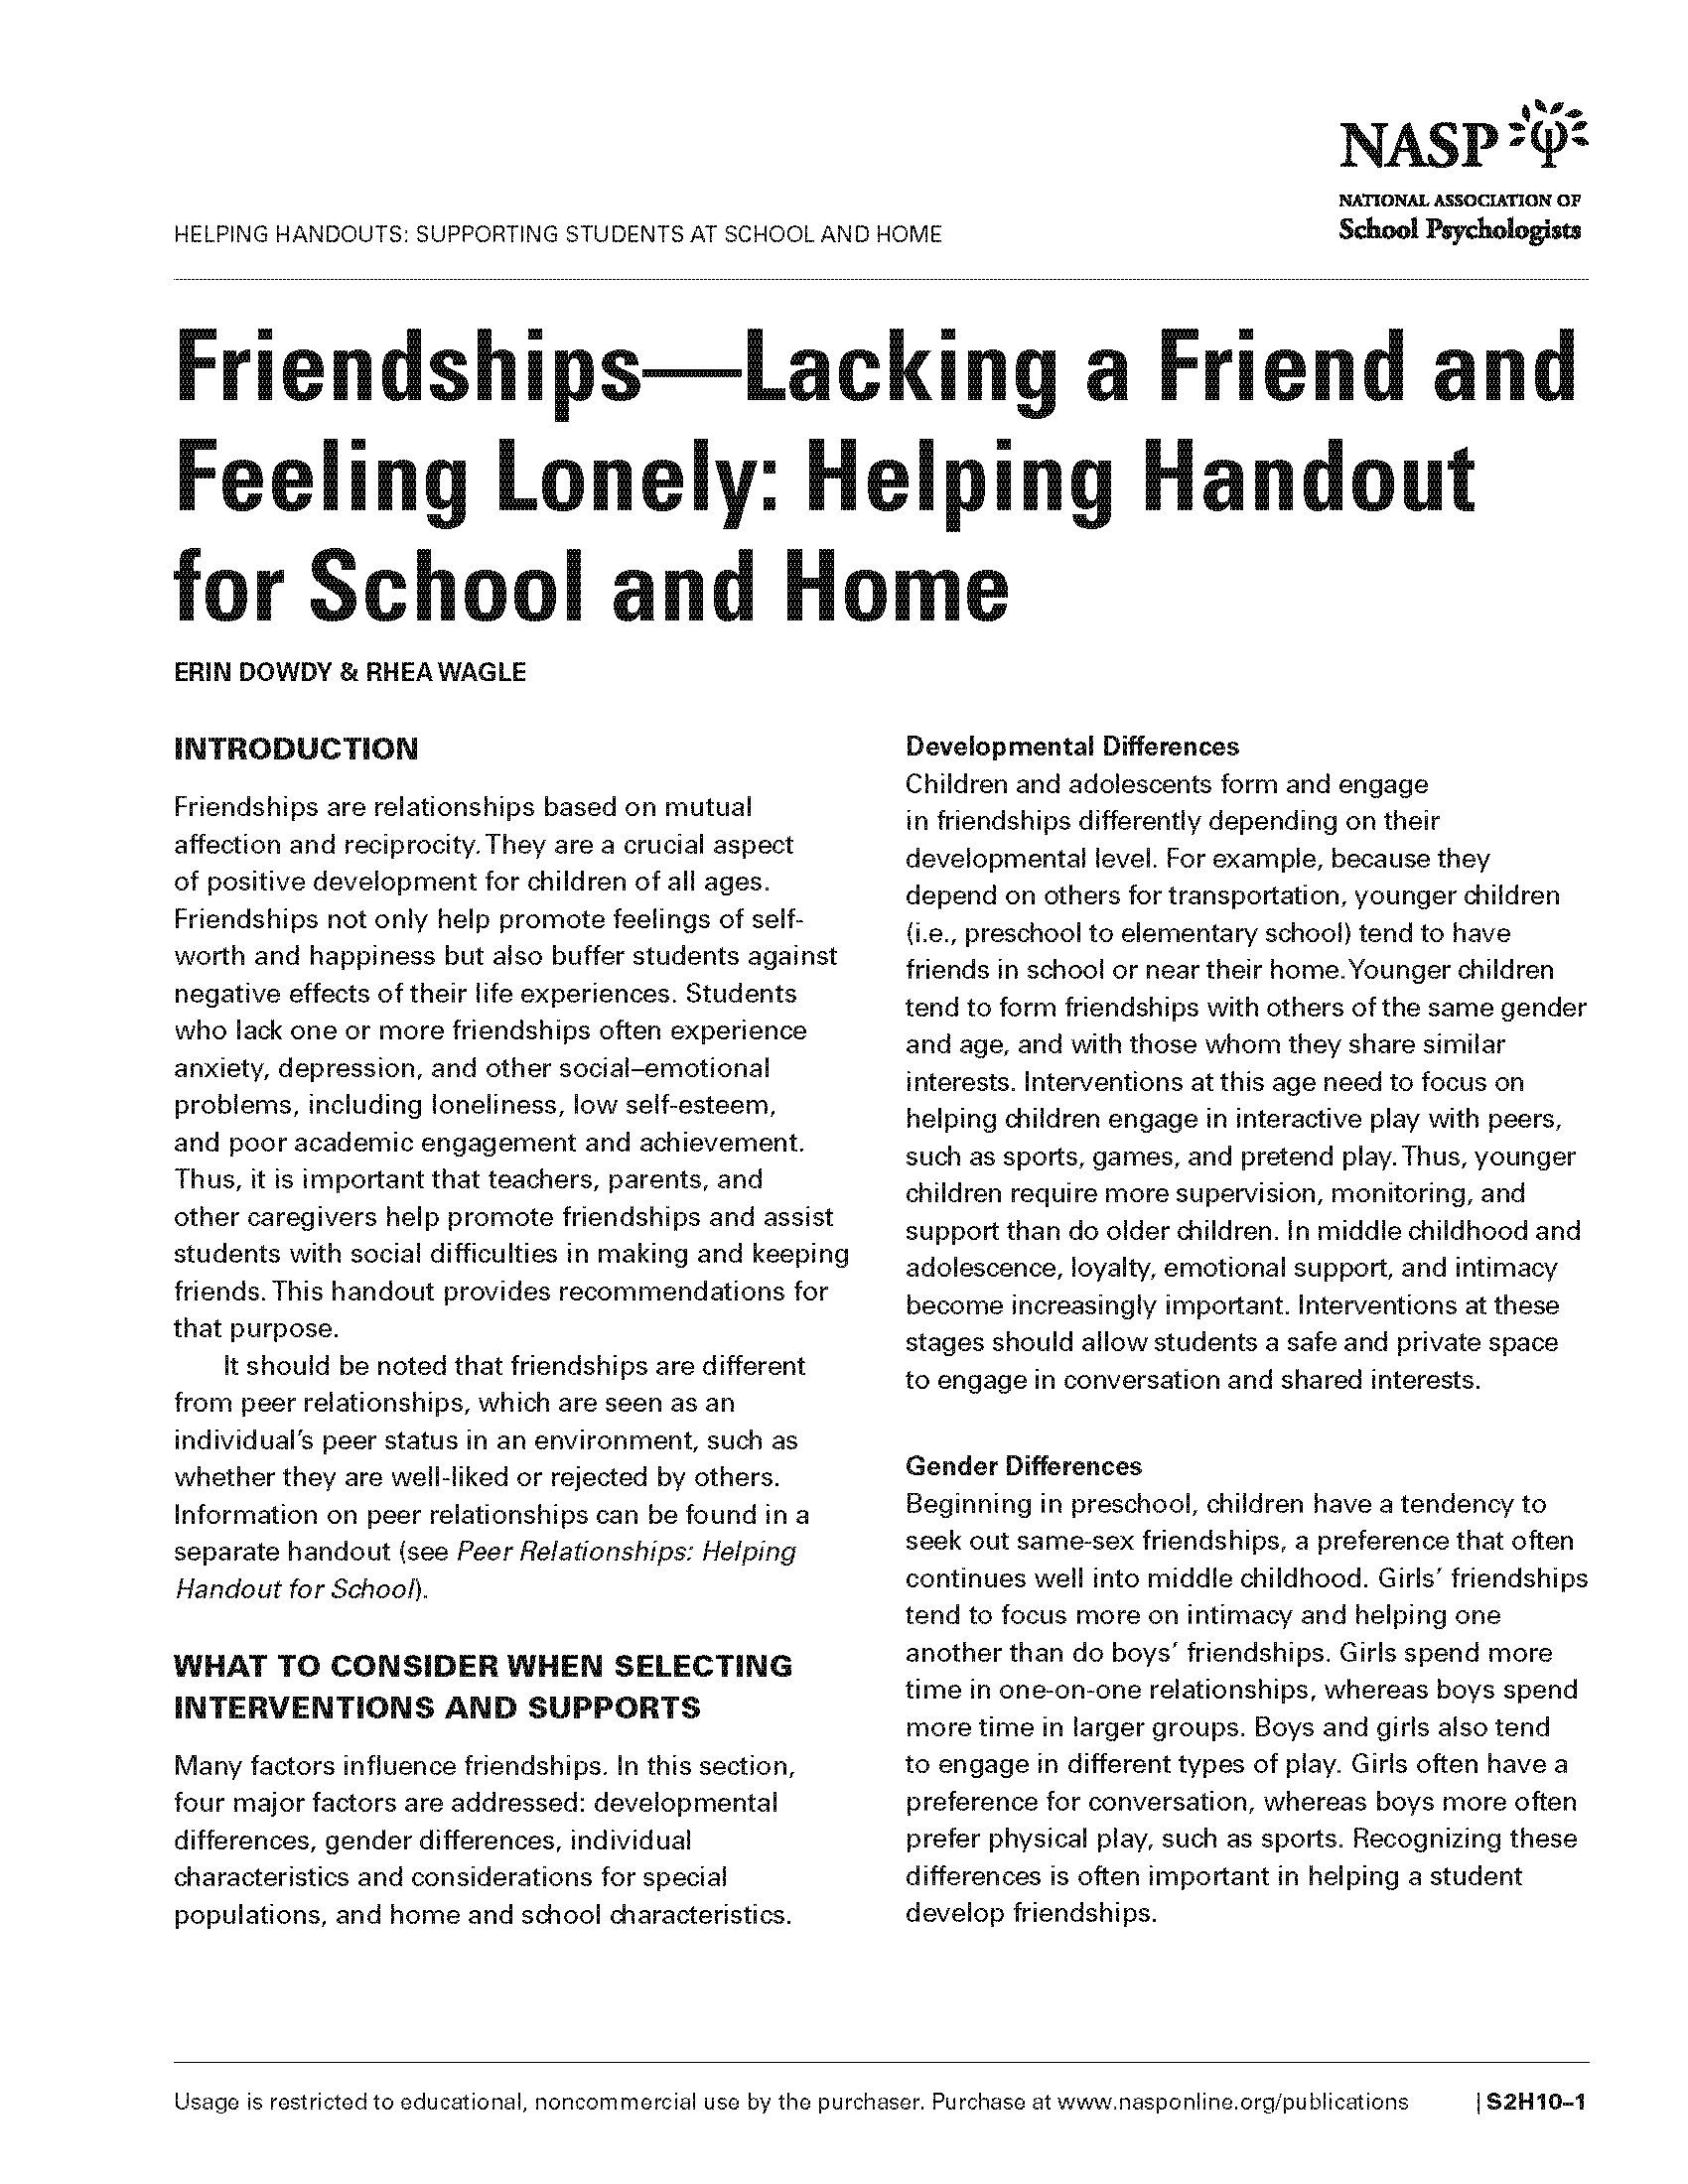 Friendships—Lacking a Friend and Feeling Lonely: Helping Handout for School and Home